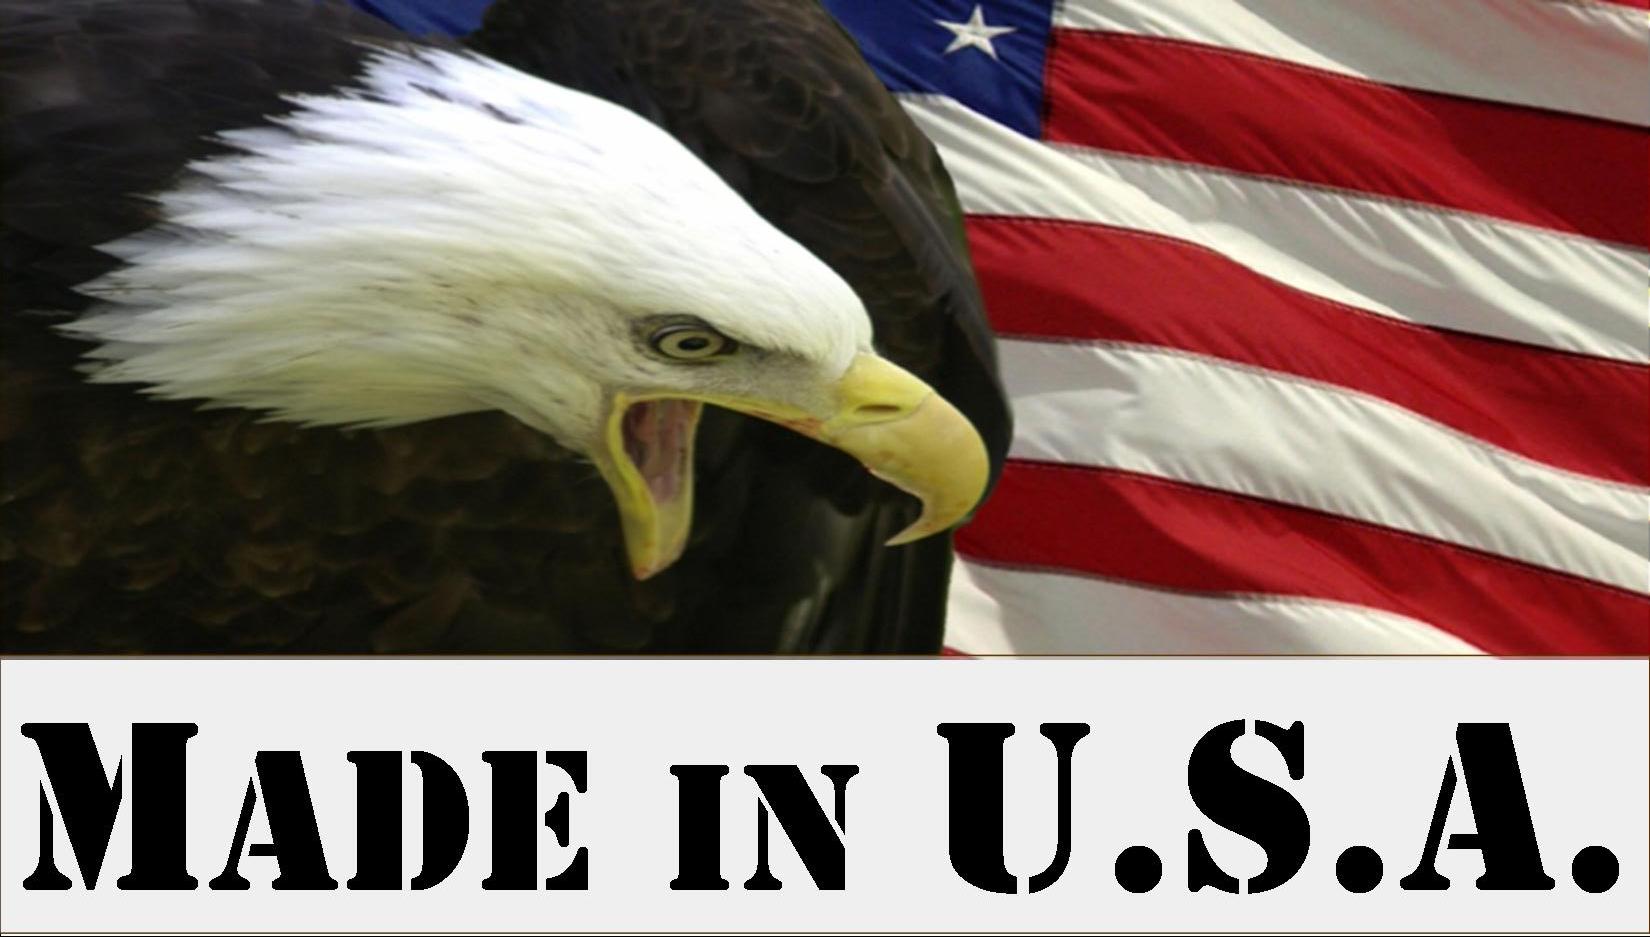     Made In Usa Logo  Click For Large Printable File Of This Made In U S A